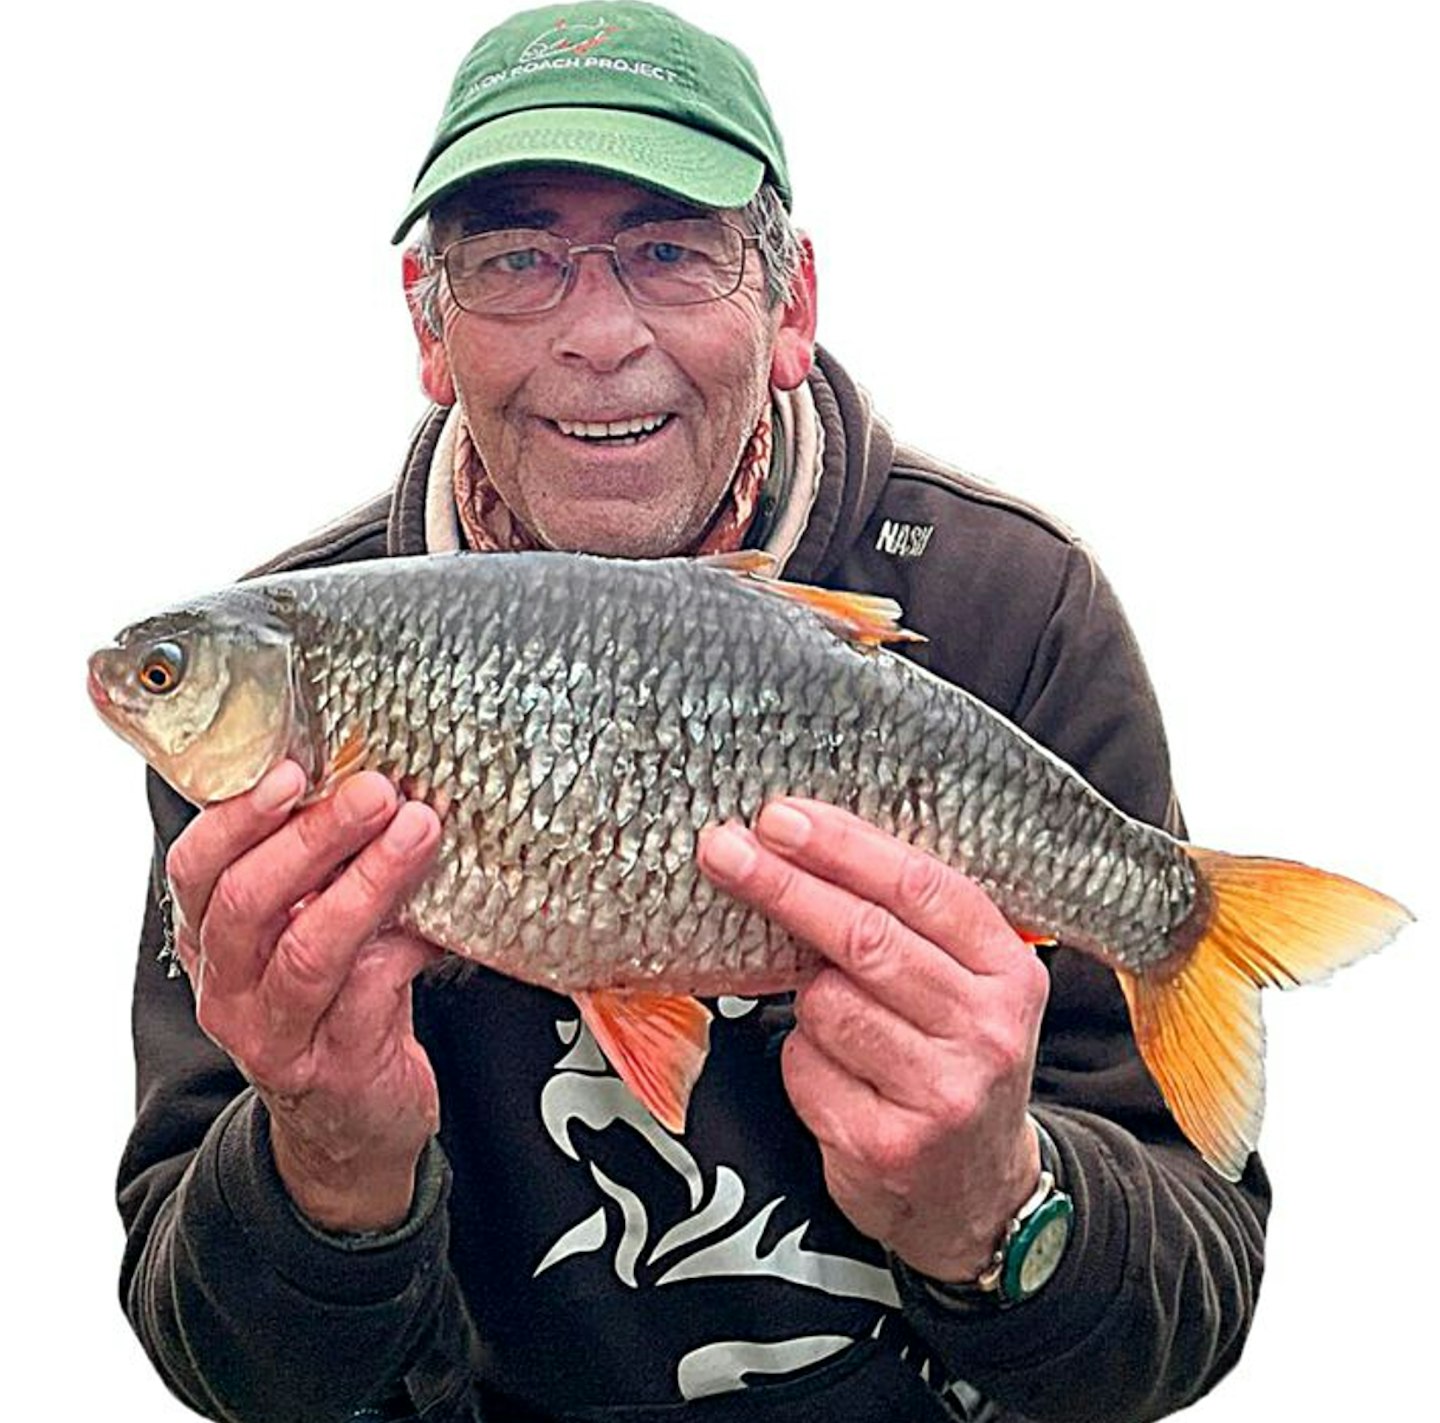 Alan Storey became the first angler in history to bank a 4lb roach from both a stillwater and river with this fish of 4lb 2oz